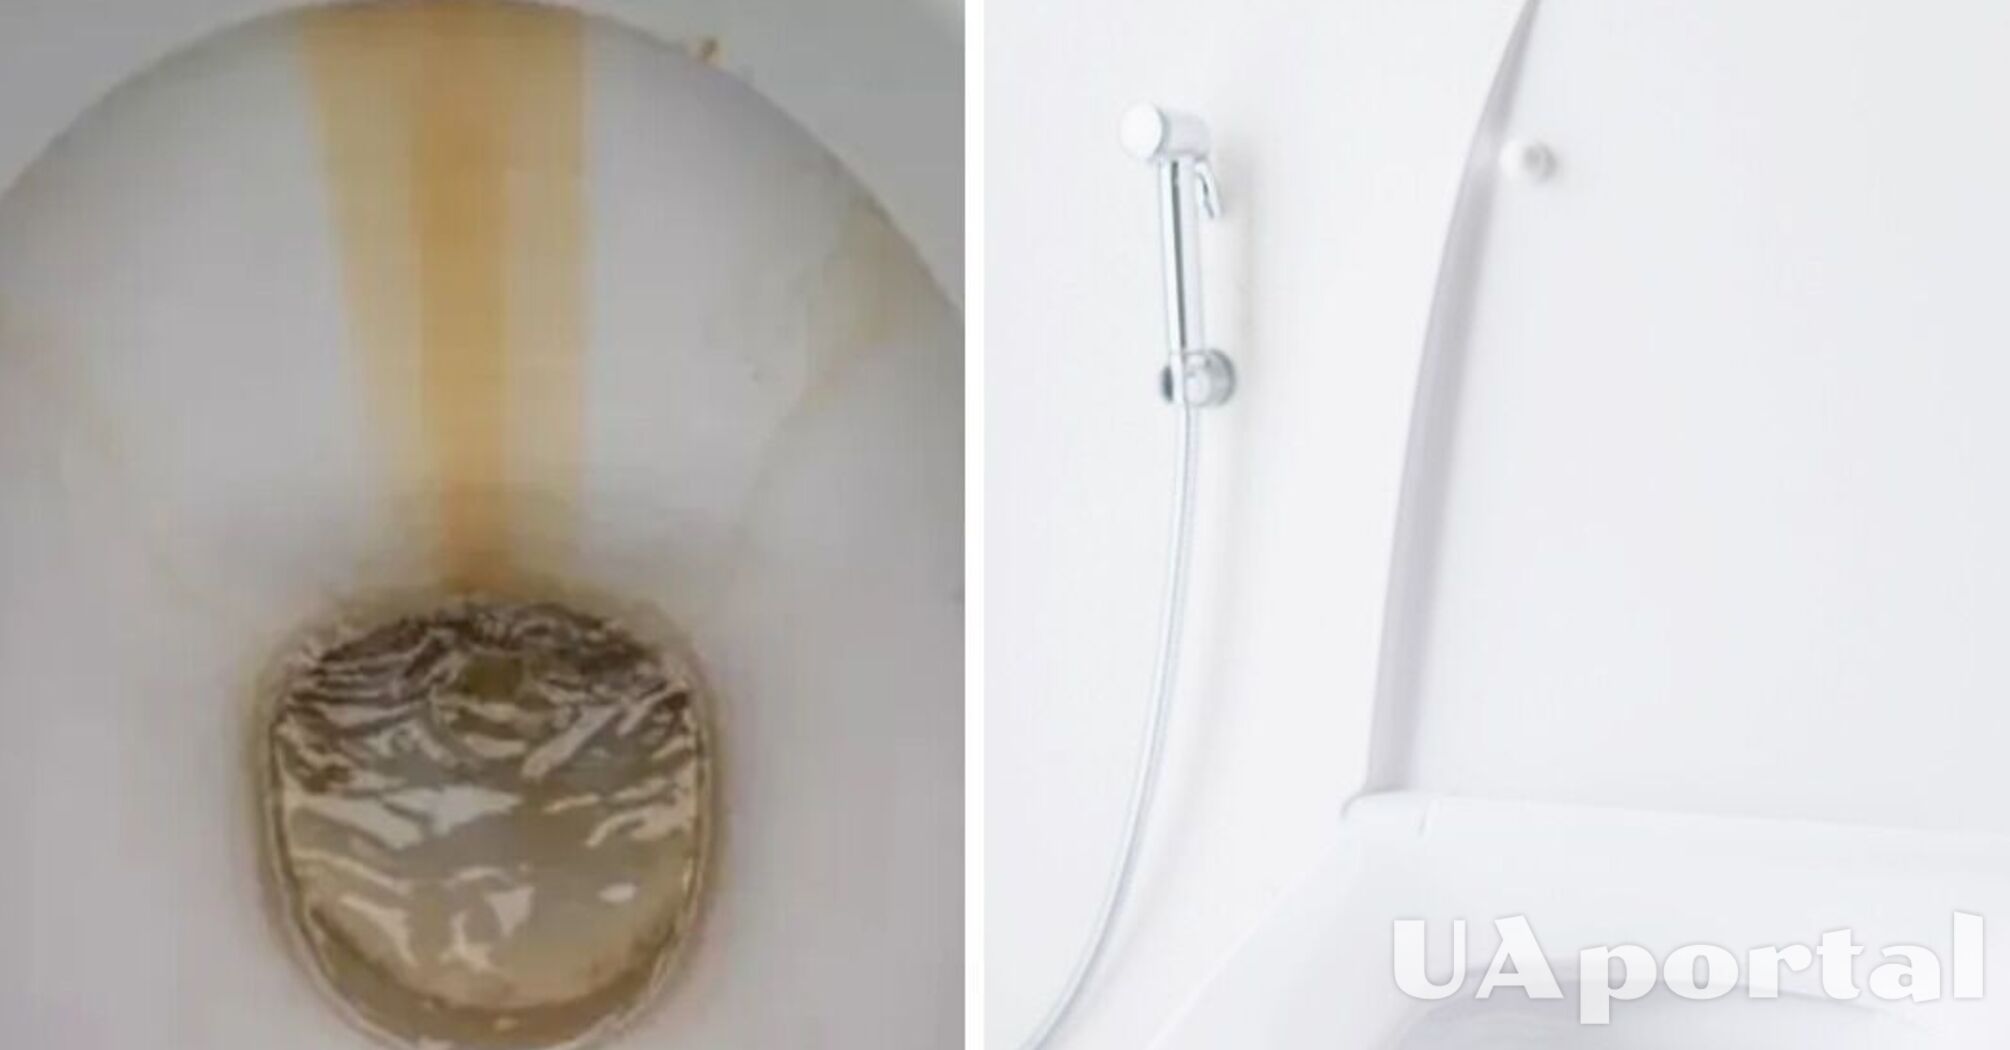 Experts talked about a cheap solution for removing plaque from the toilet bowl